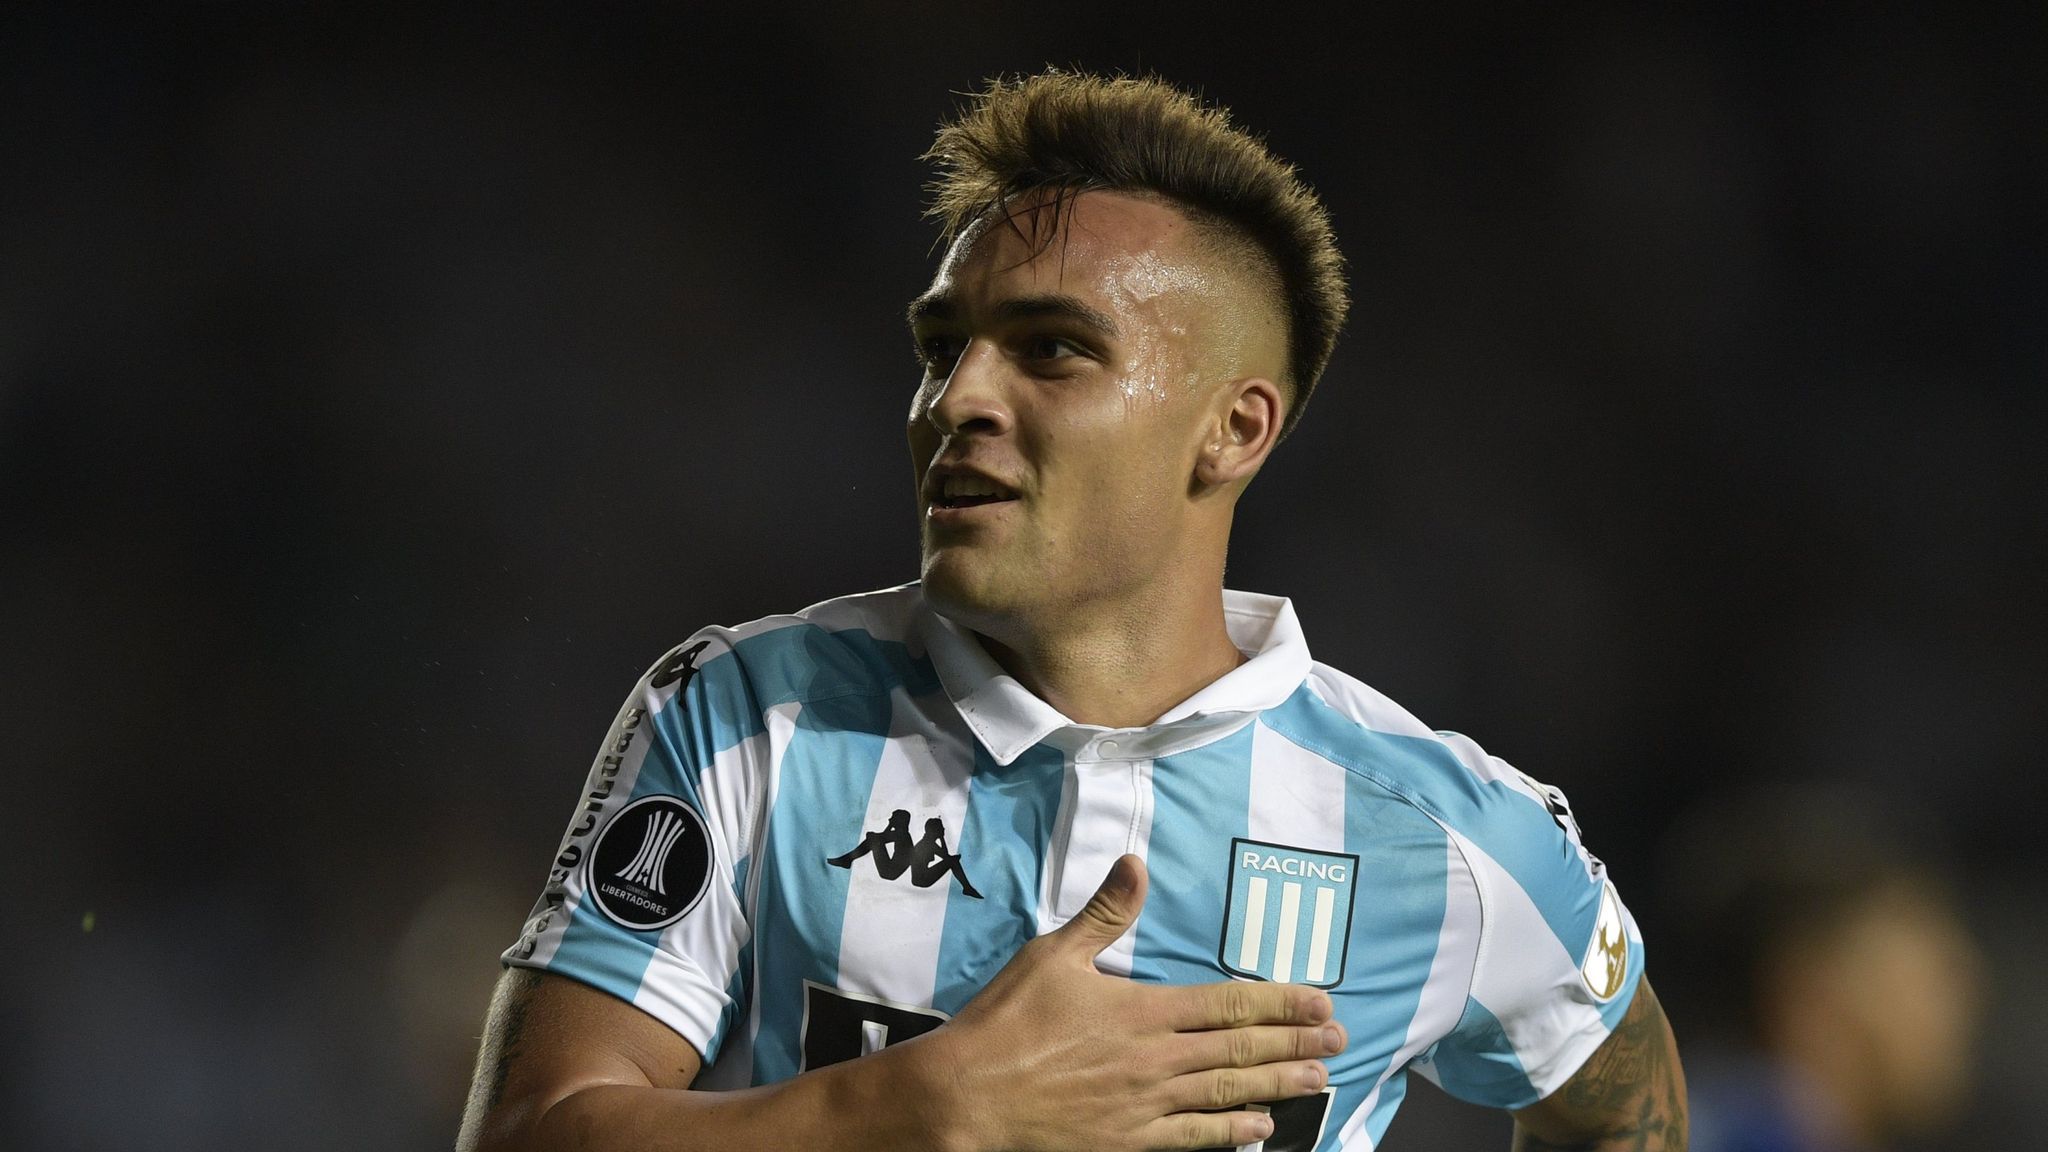 Racing Club vs Independiente: How to watch Liga Argentina matches